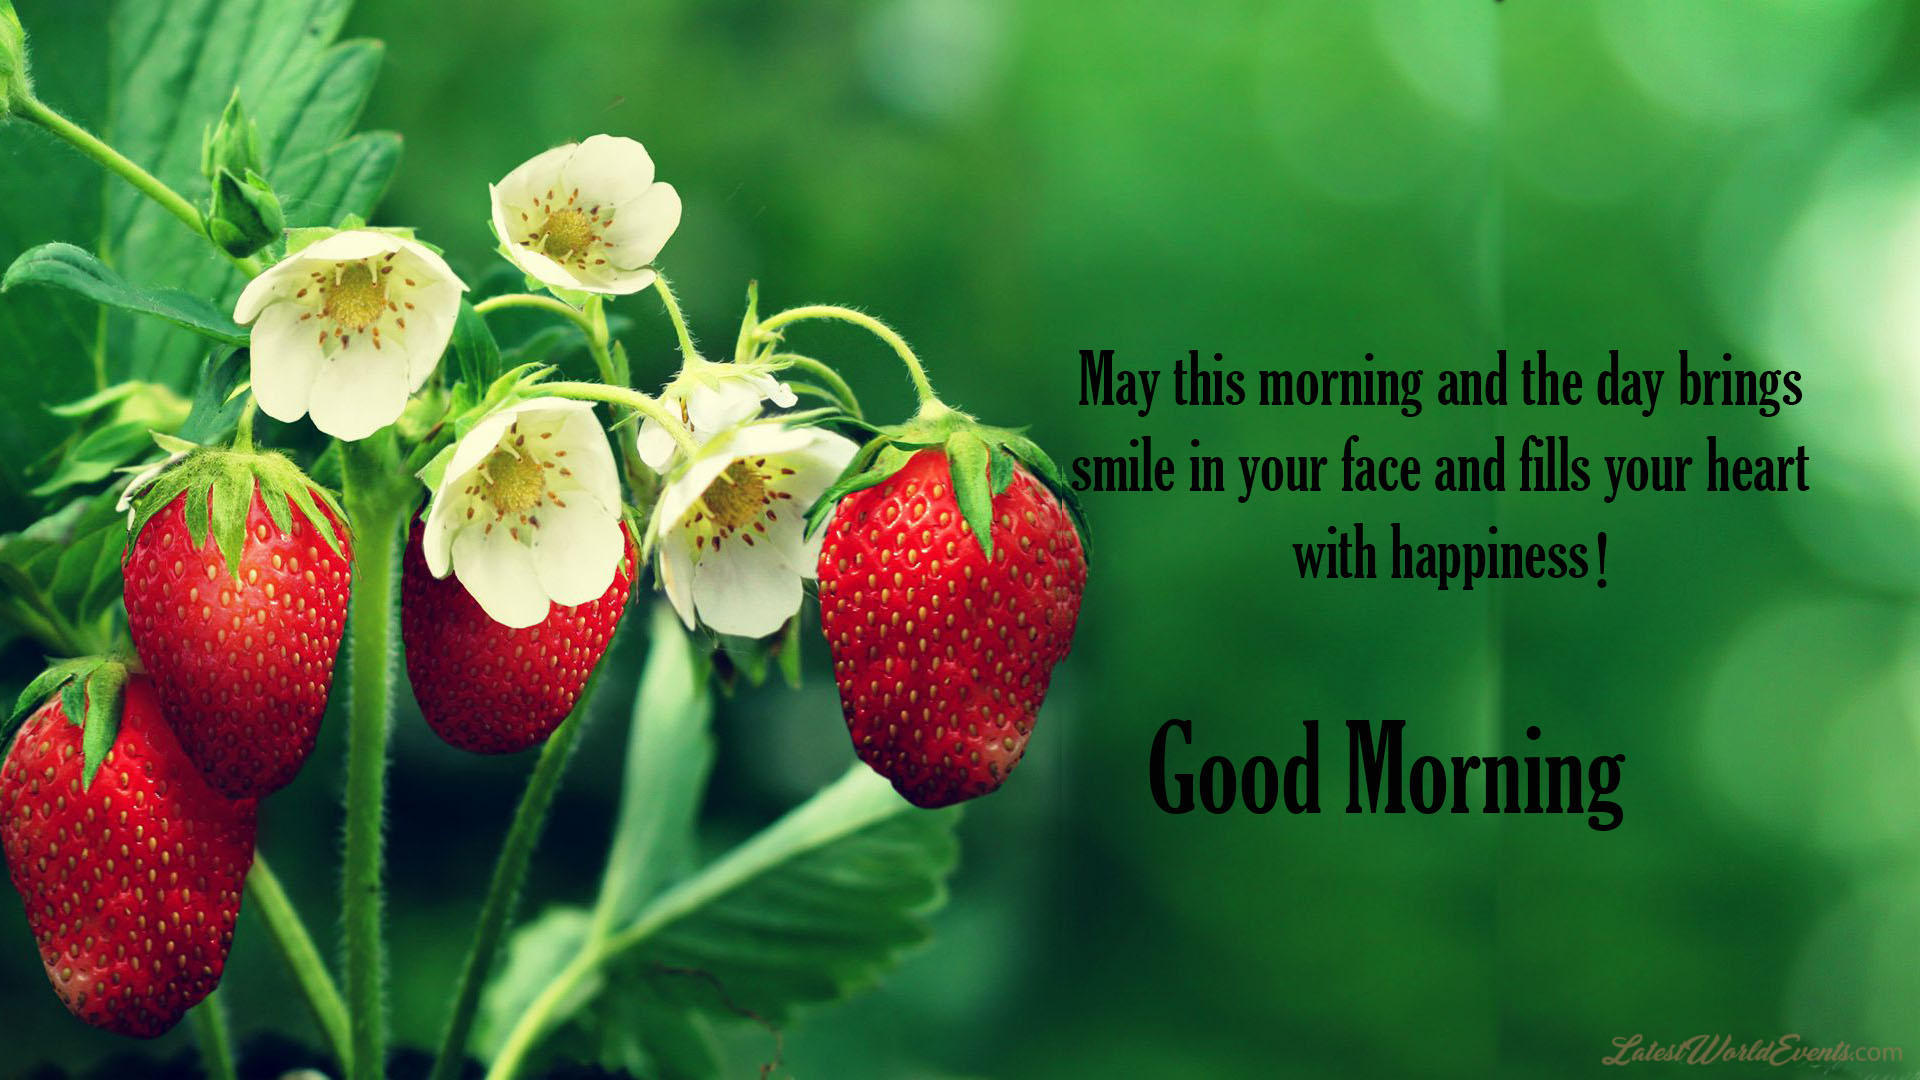 New-good-morning-wishes-quotes-cards-2018